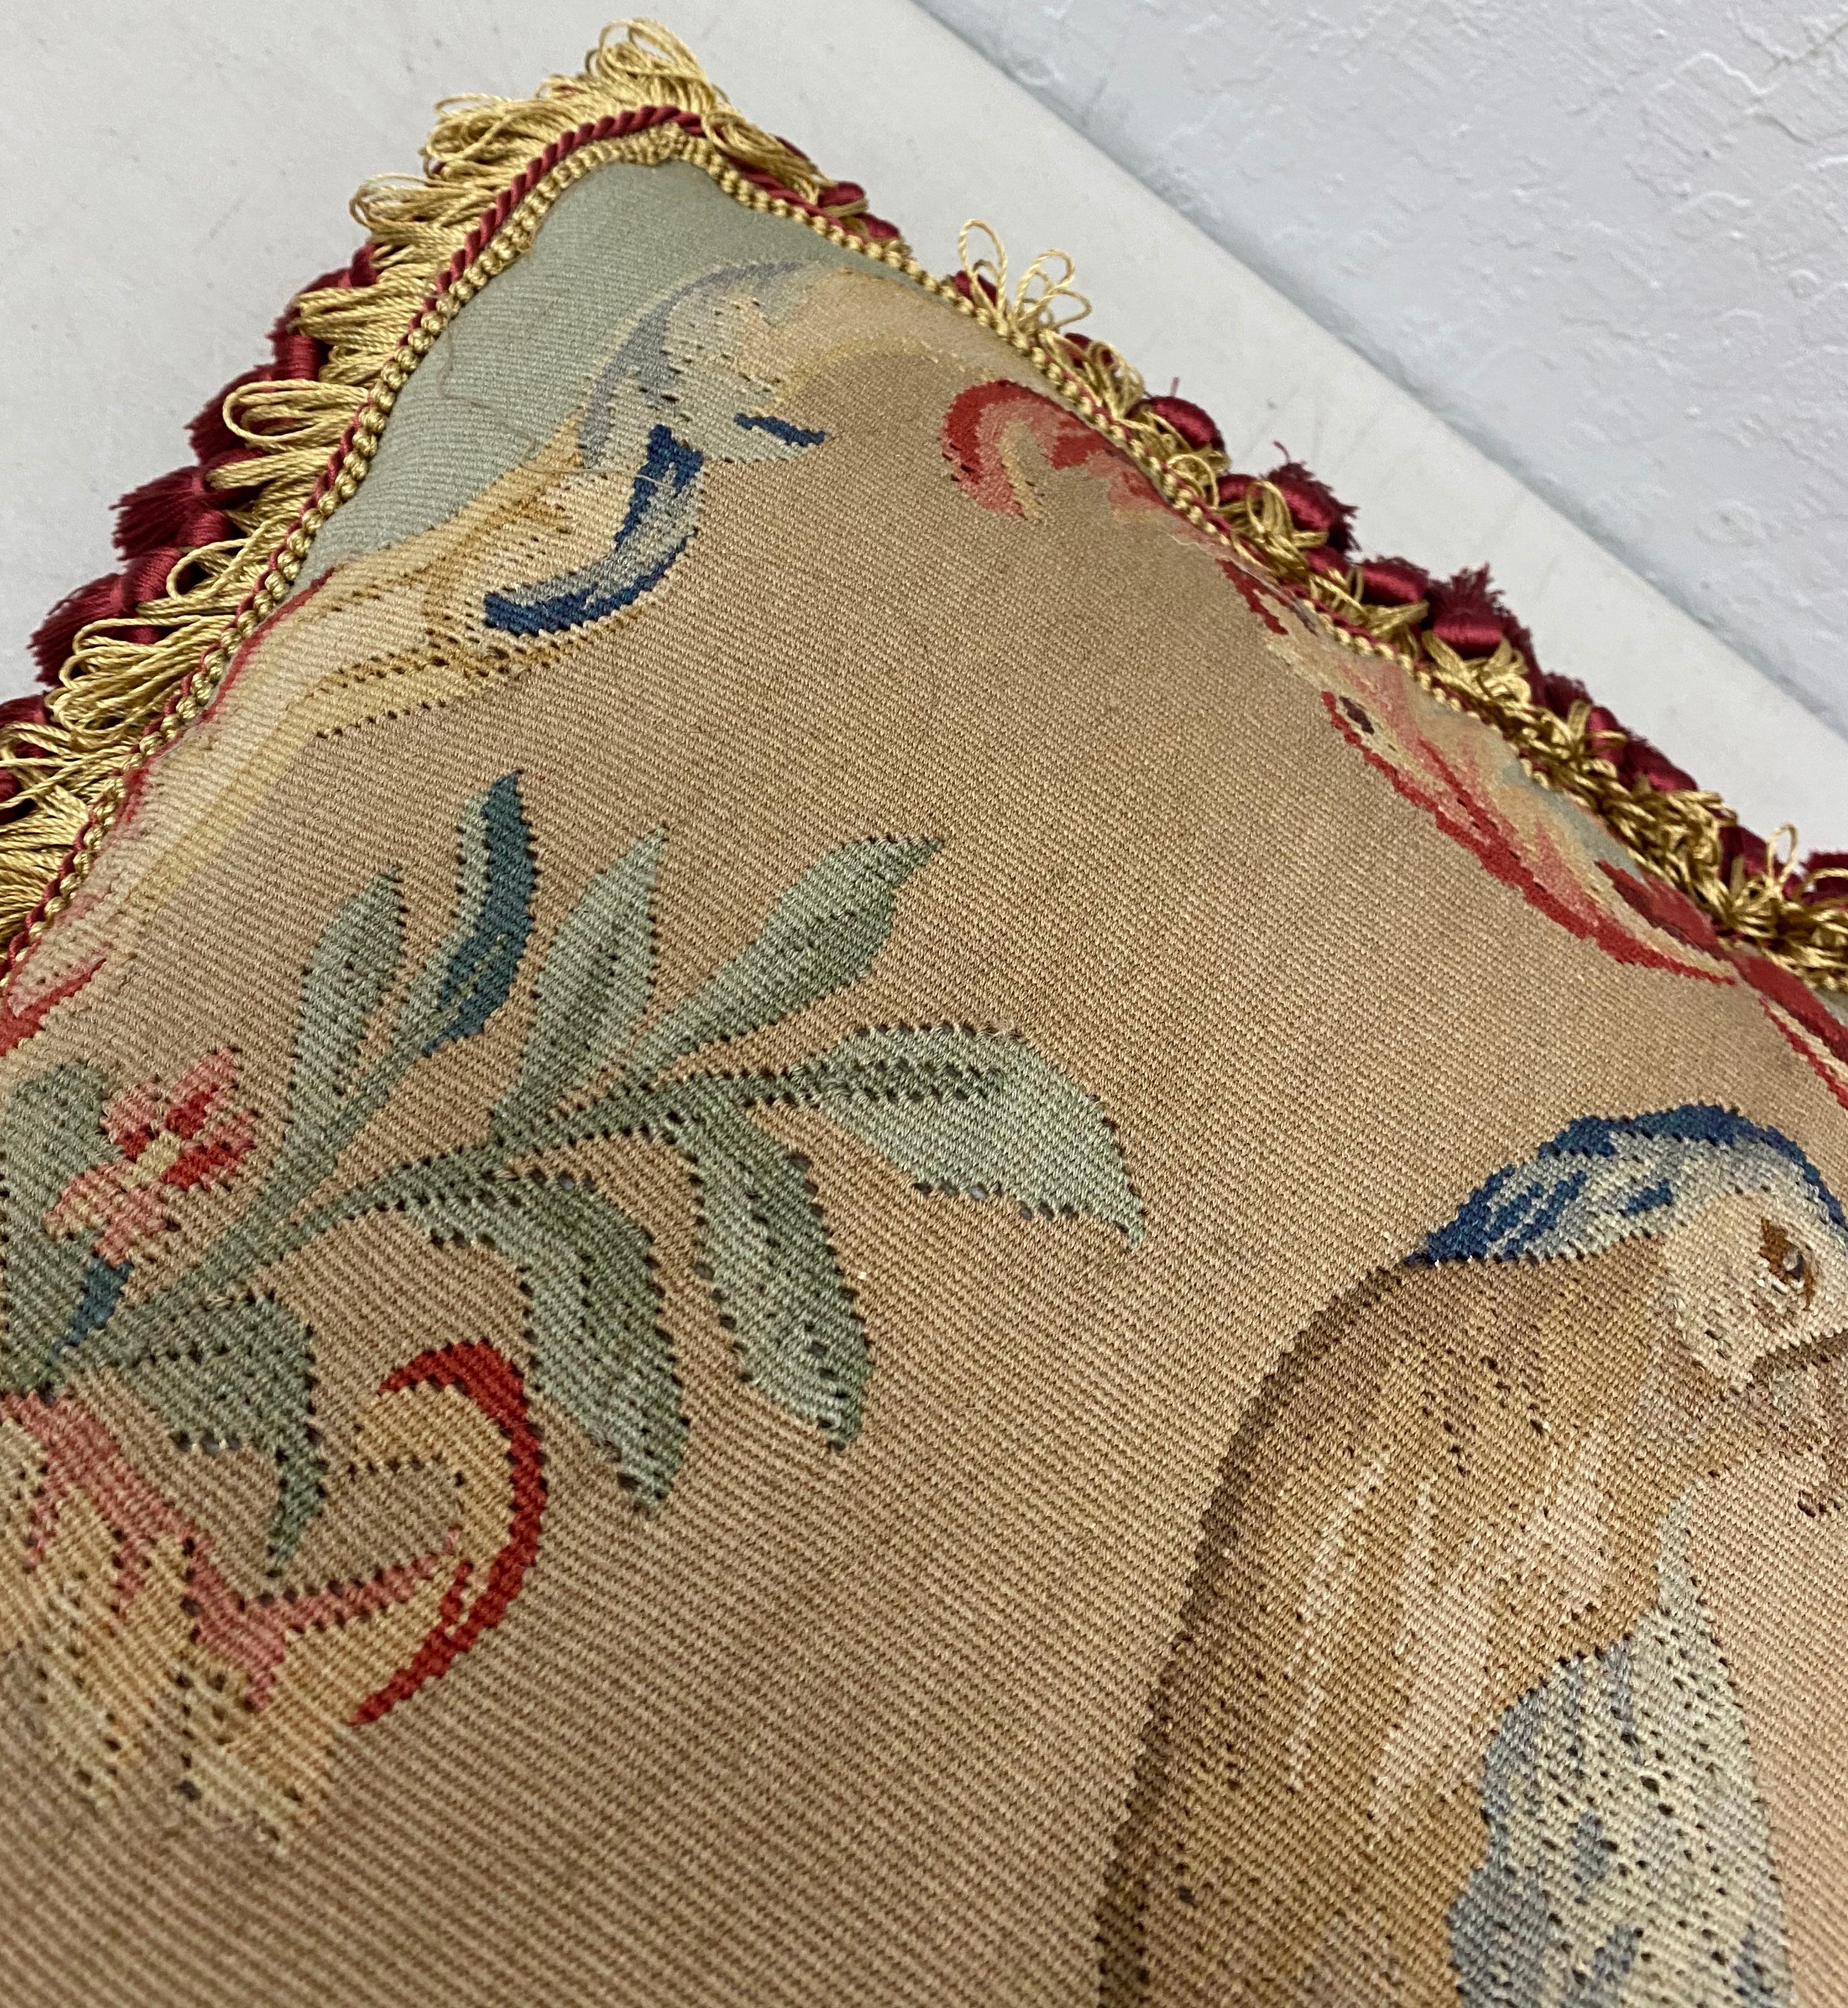 Hand-Crafted Pair of 19th Century Petit Point Panels over Mid-20th Century Pillows